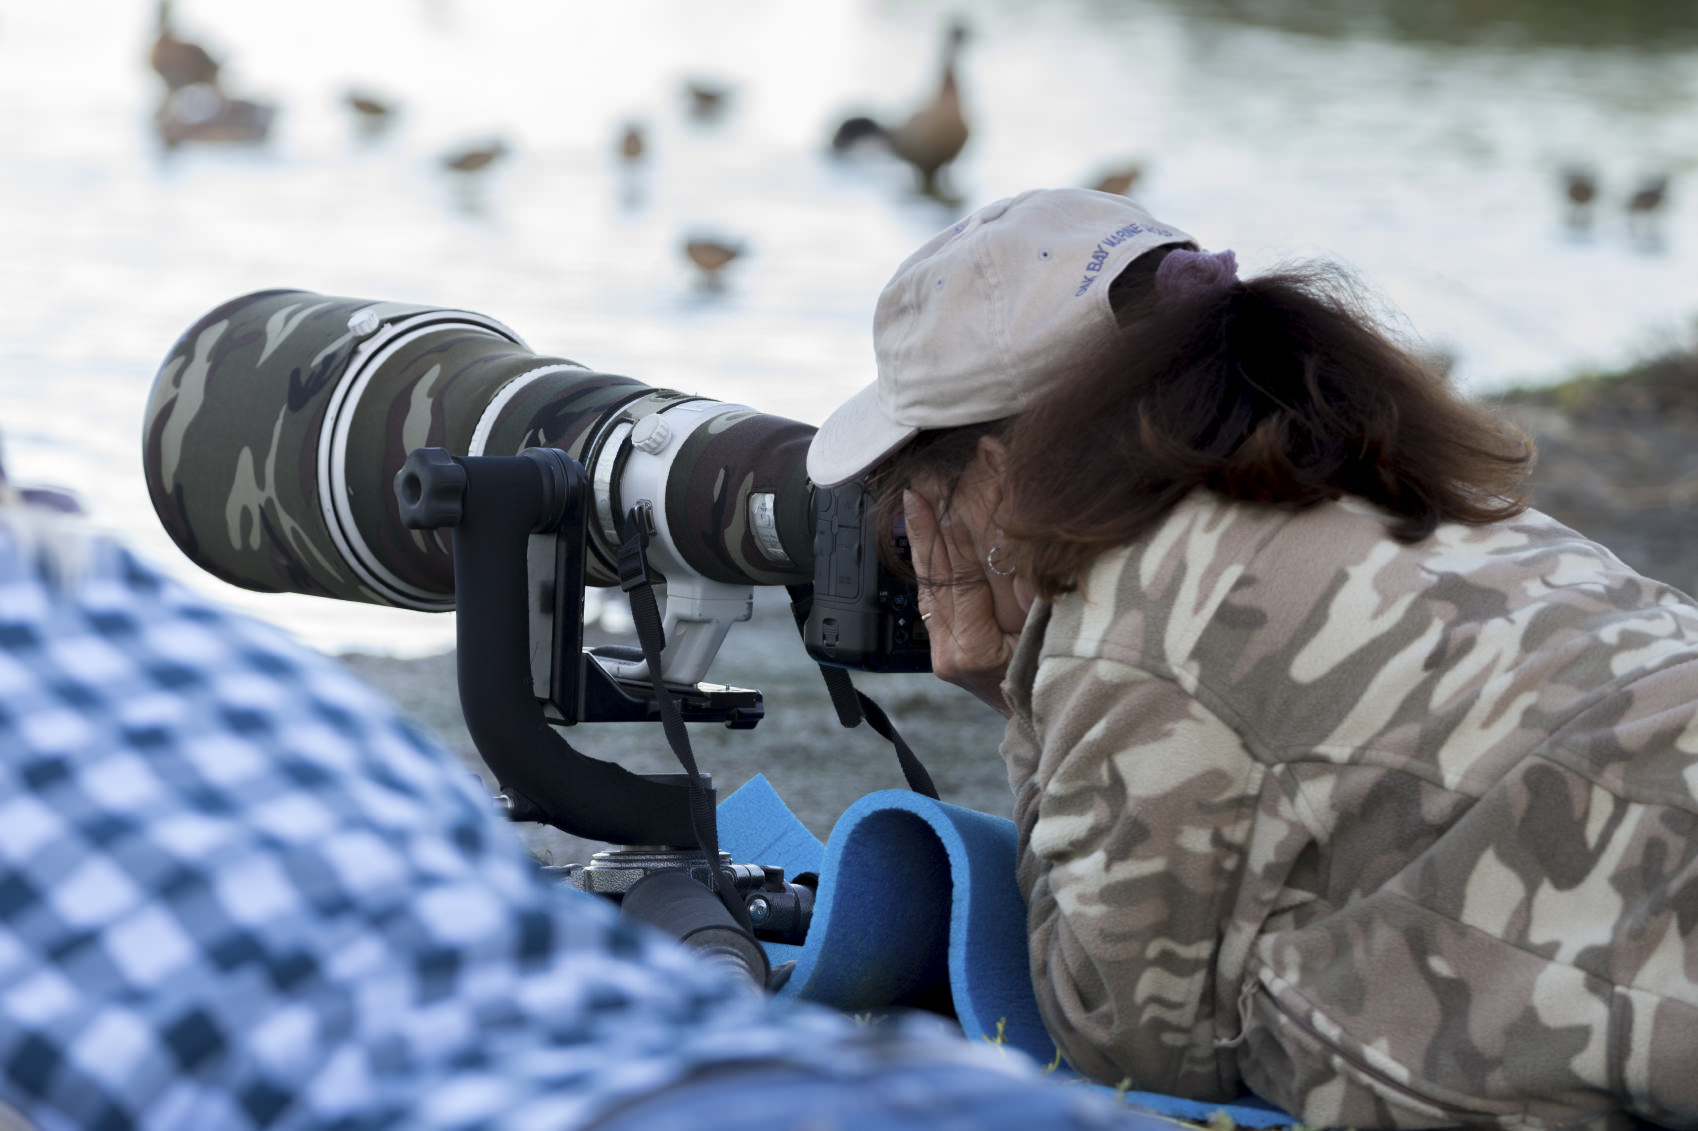 Requirements for a career as a wildlife photographer